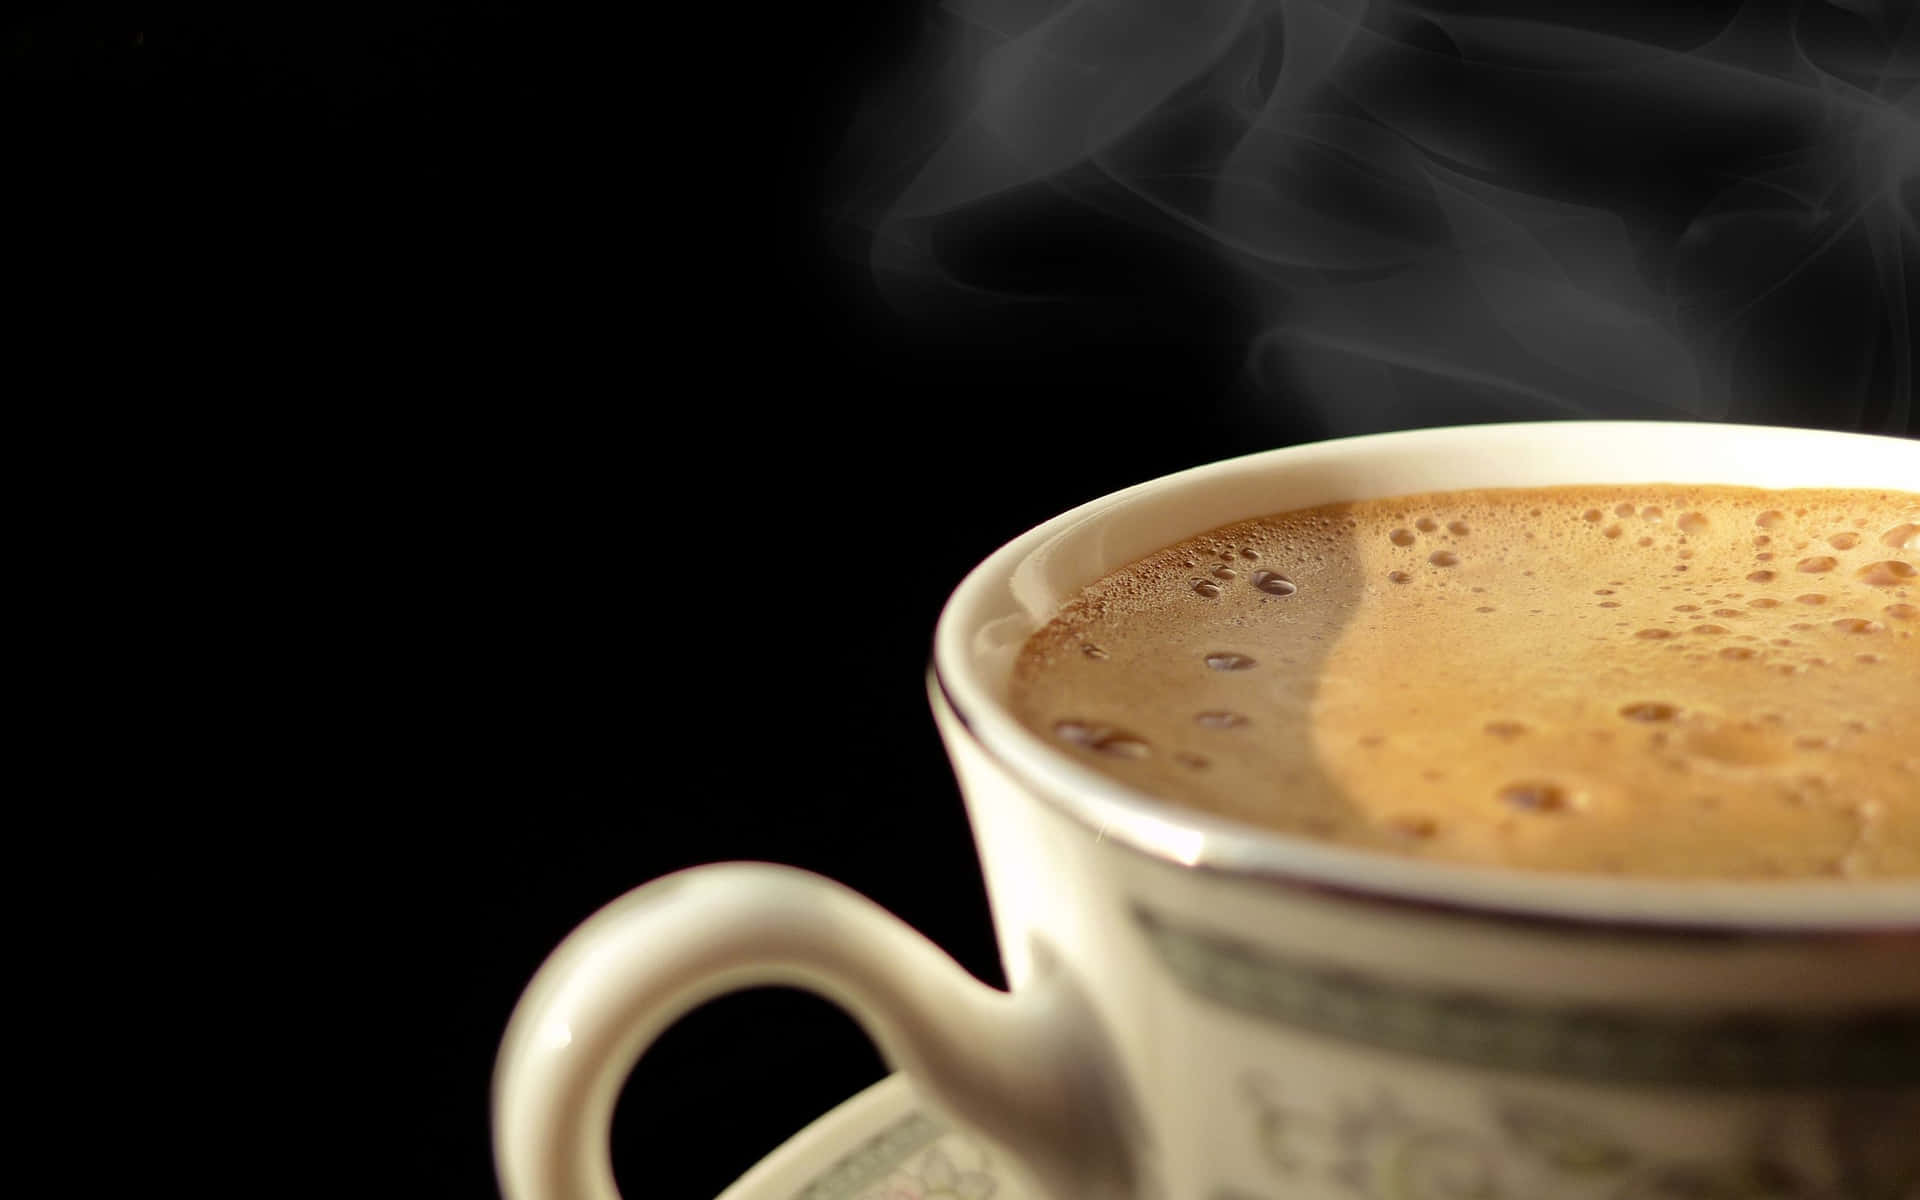 A Cup Of Coffee With Smoke Coming Out Of It